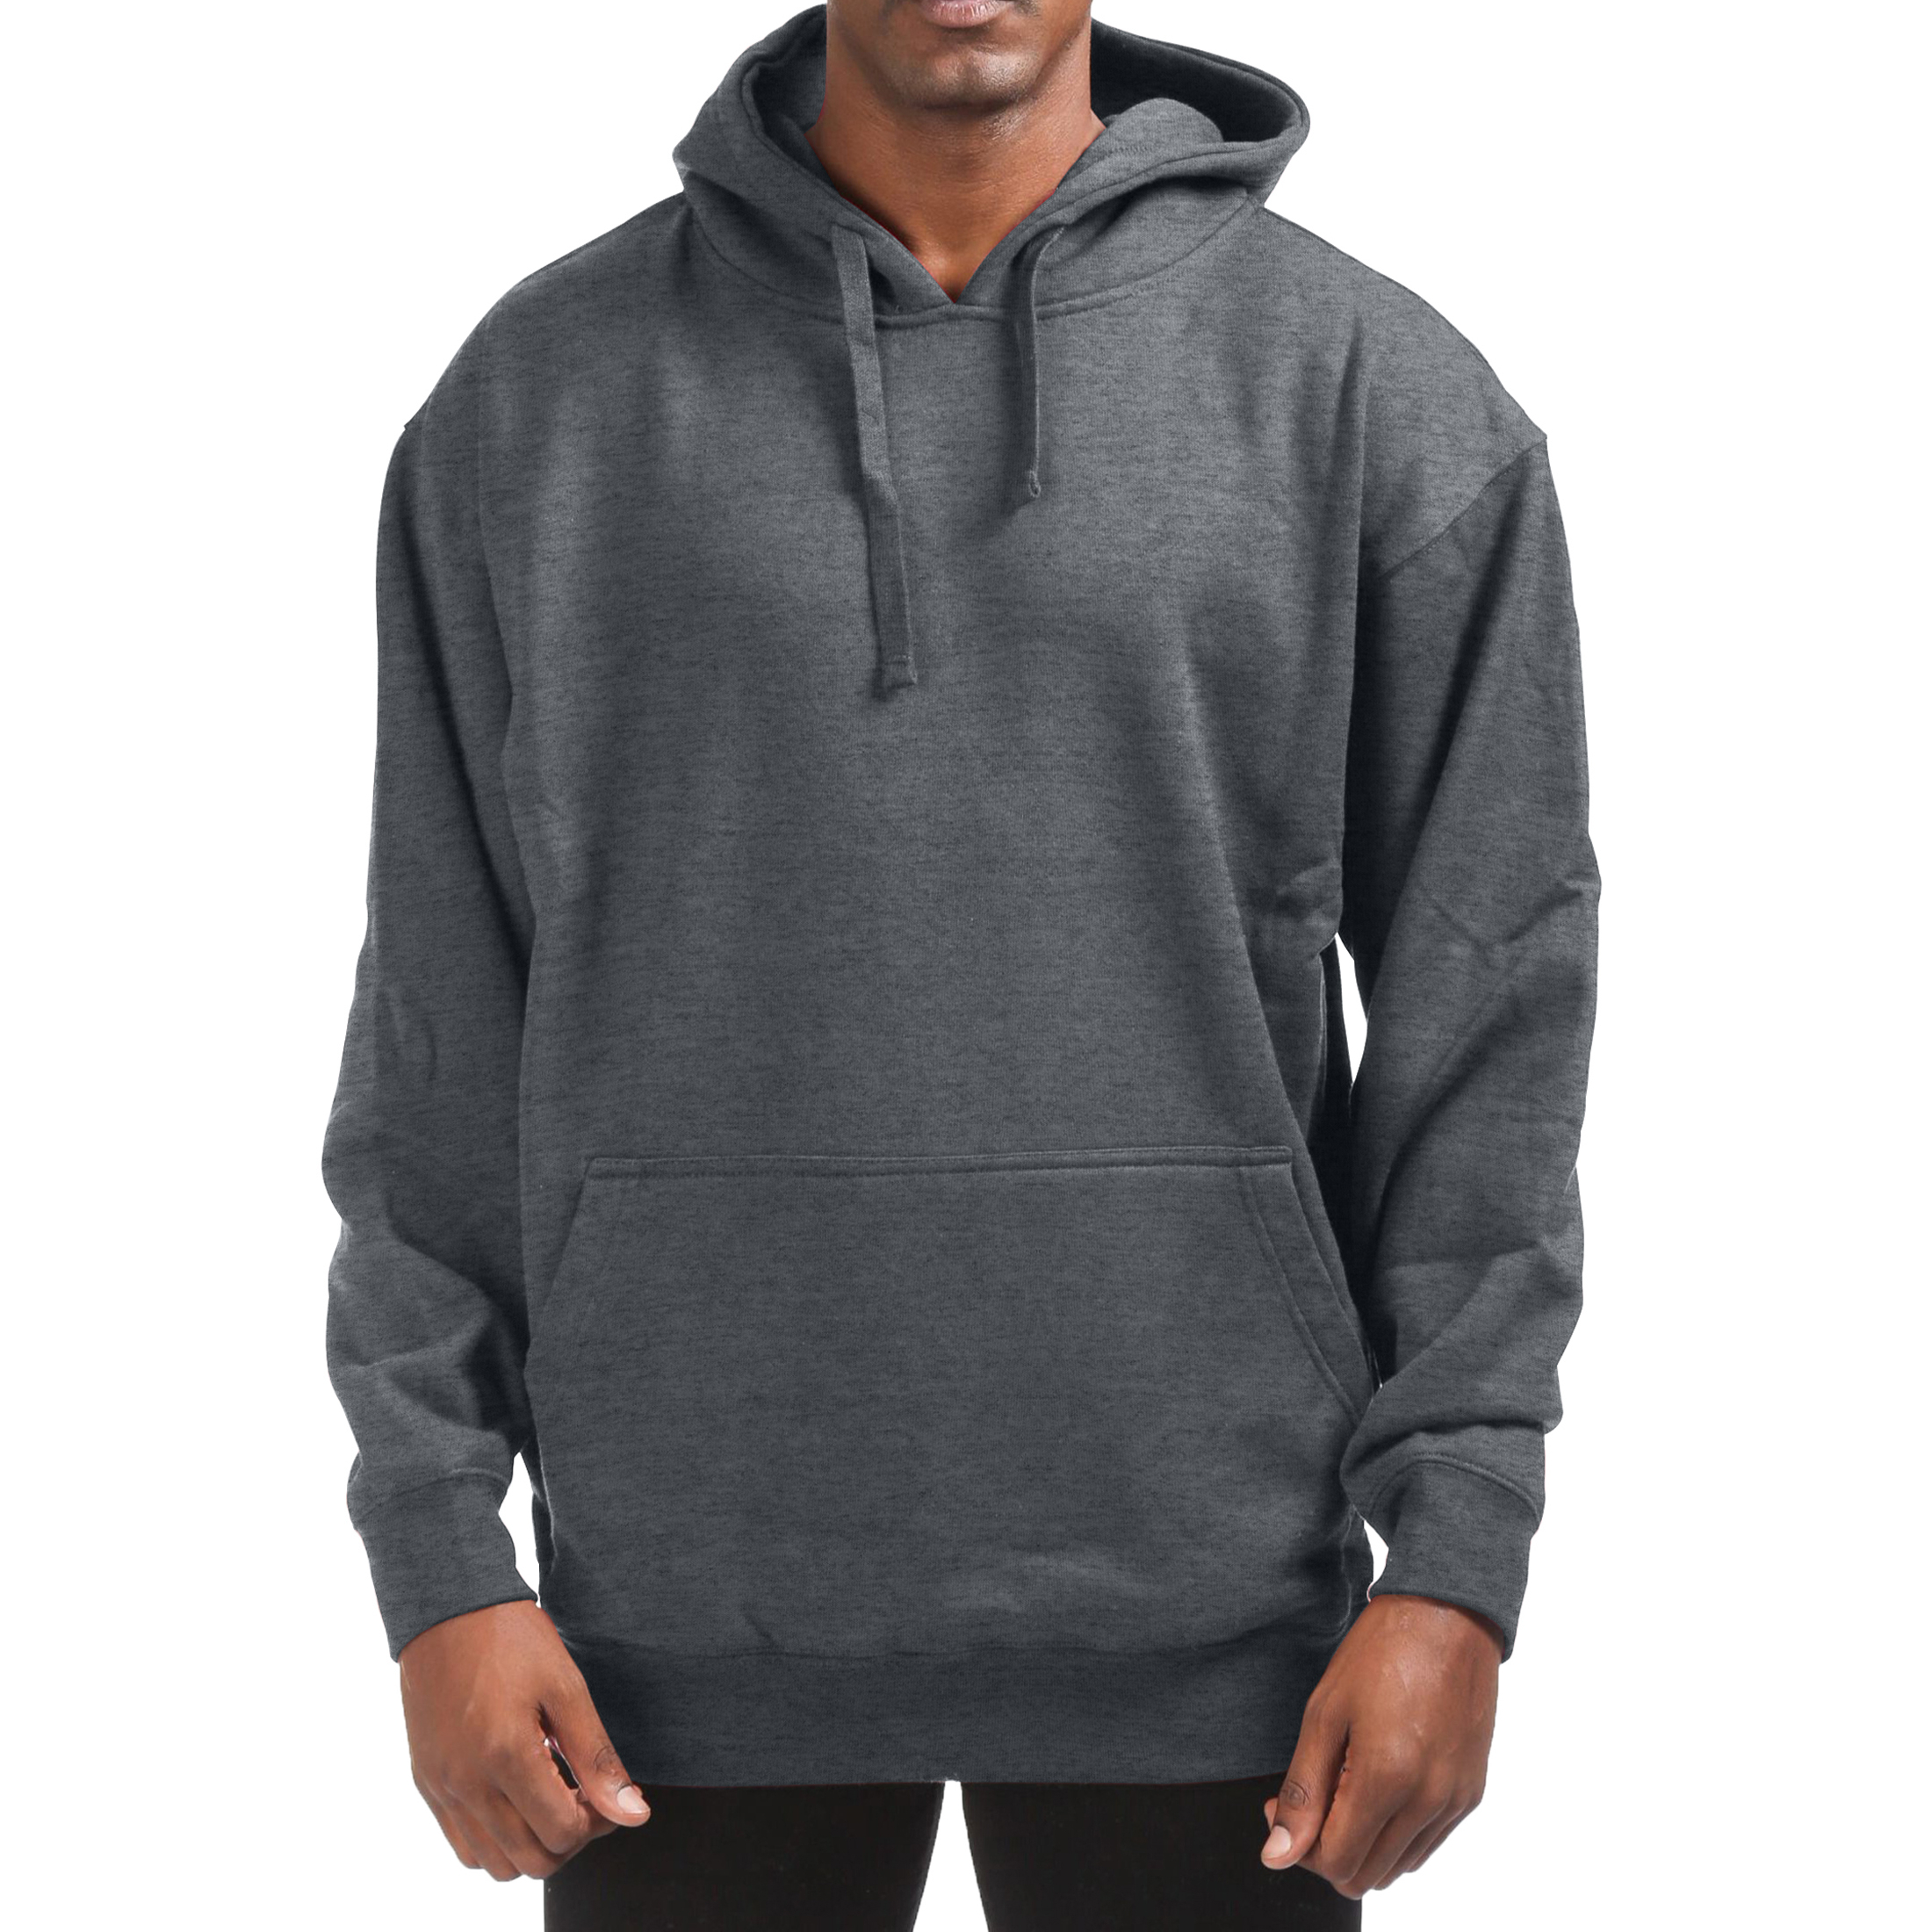 Men's Cotton-Blend Fleece Pullover Hoodie With Pocket (Big & Tall Sizes Available) - Charcoal, 3X-Large